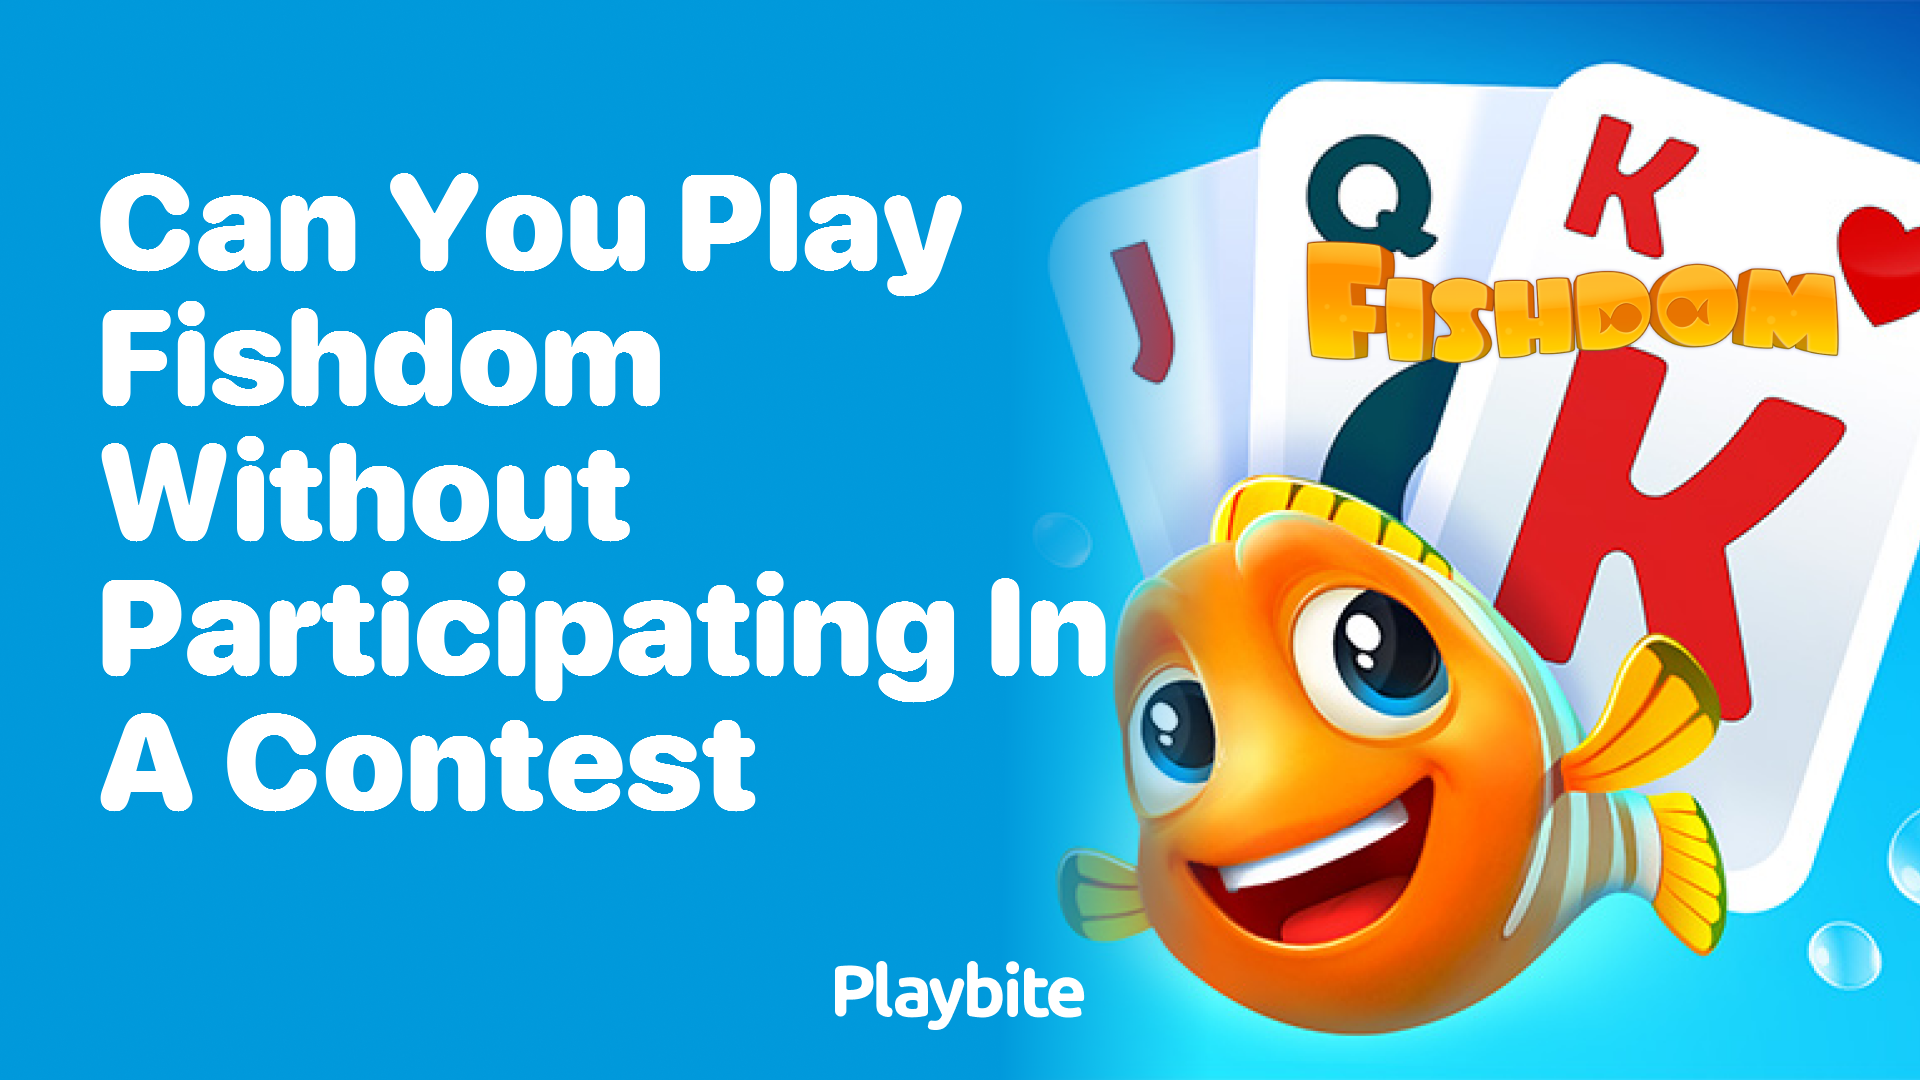 Can You Play Fishdom Without Participating in a Contest?